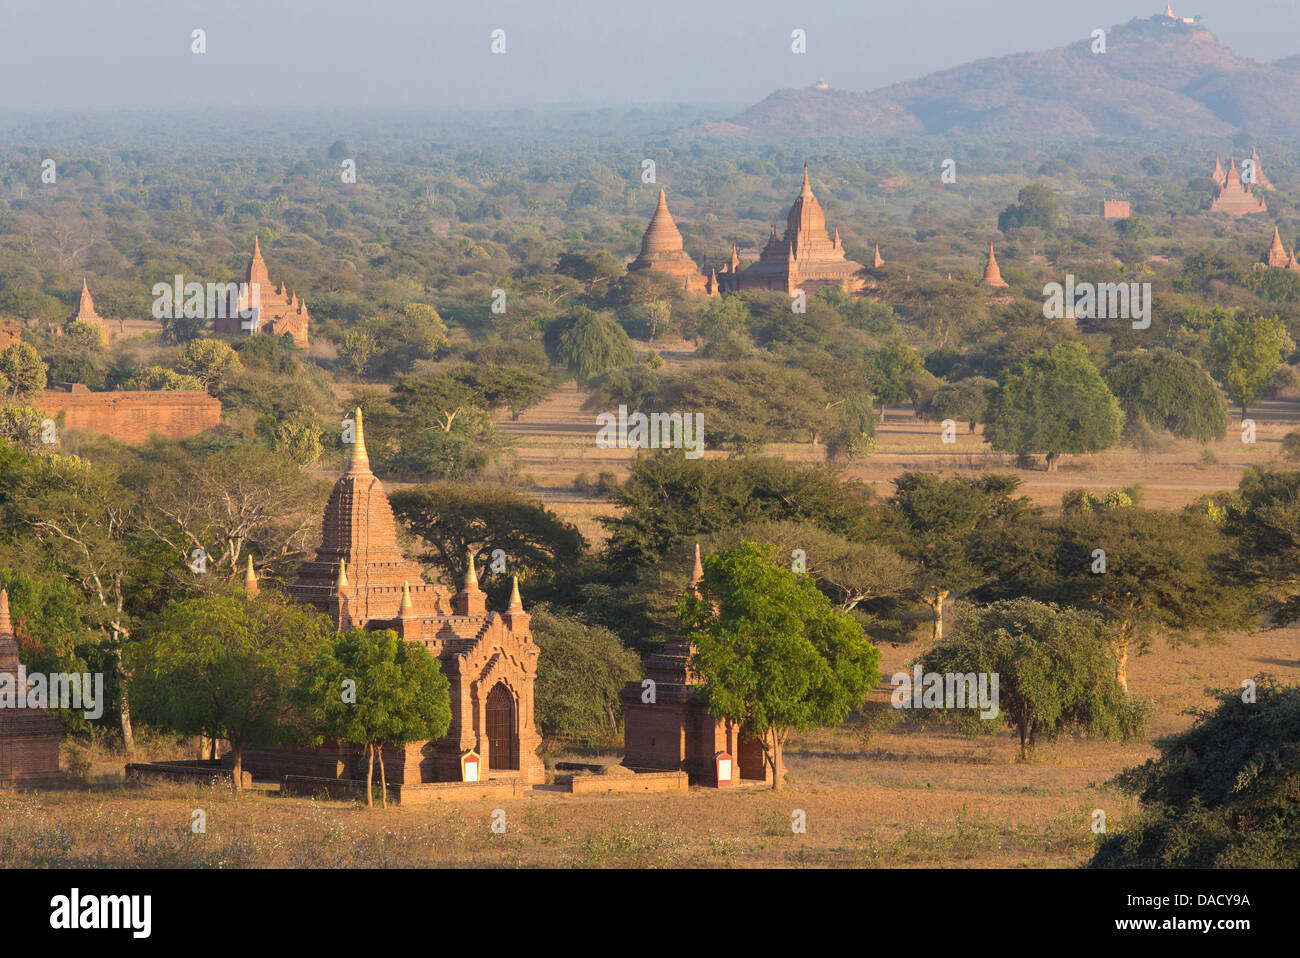 View over the temples of Bagan bathed in evening sunlight, from Shwesandaw Paya, Bagan, Myanmar (Burma), Southeast Asia Stock Photo